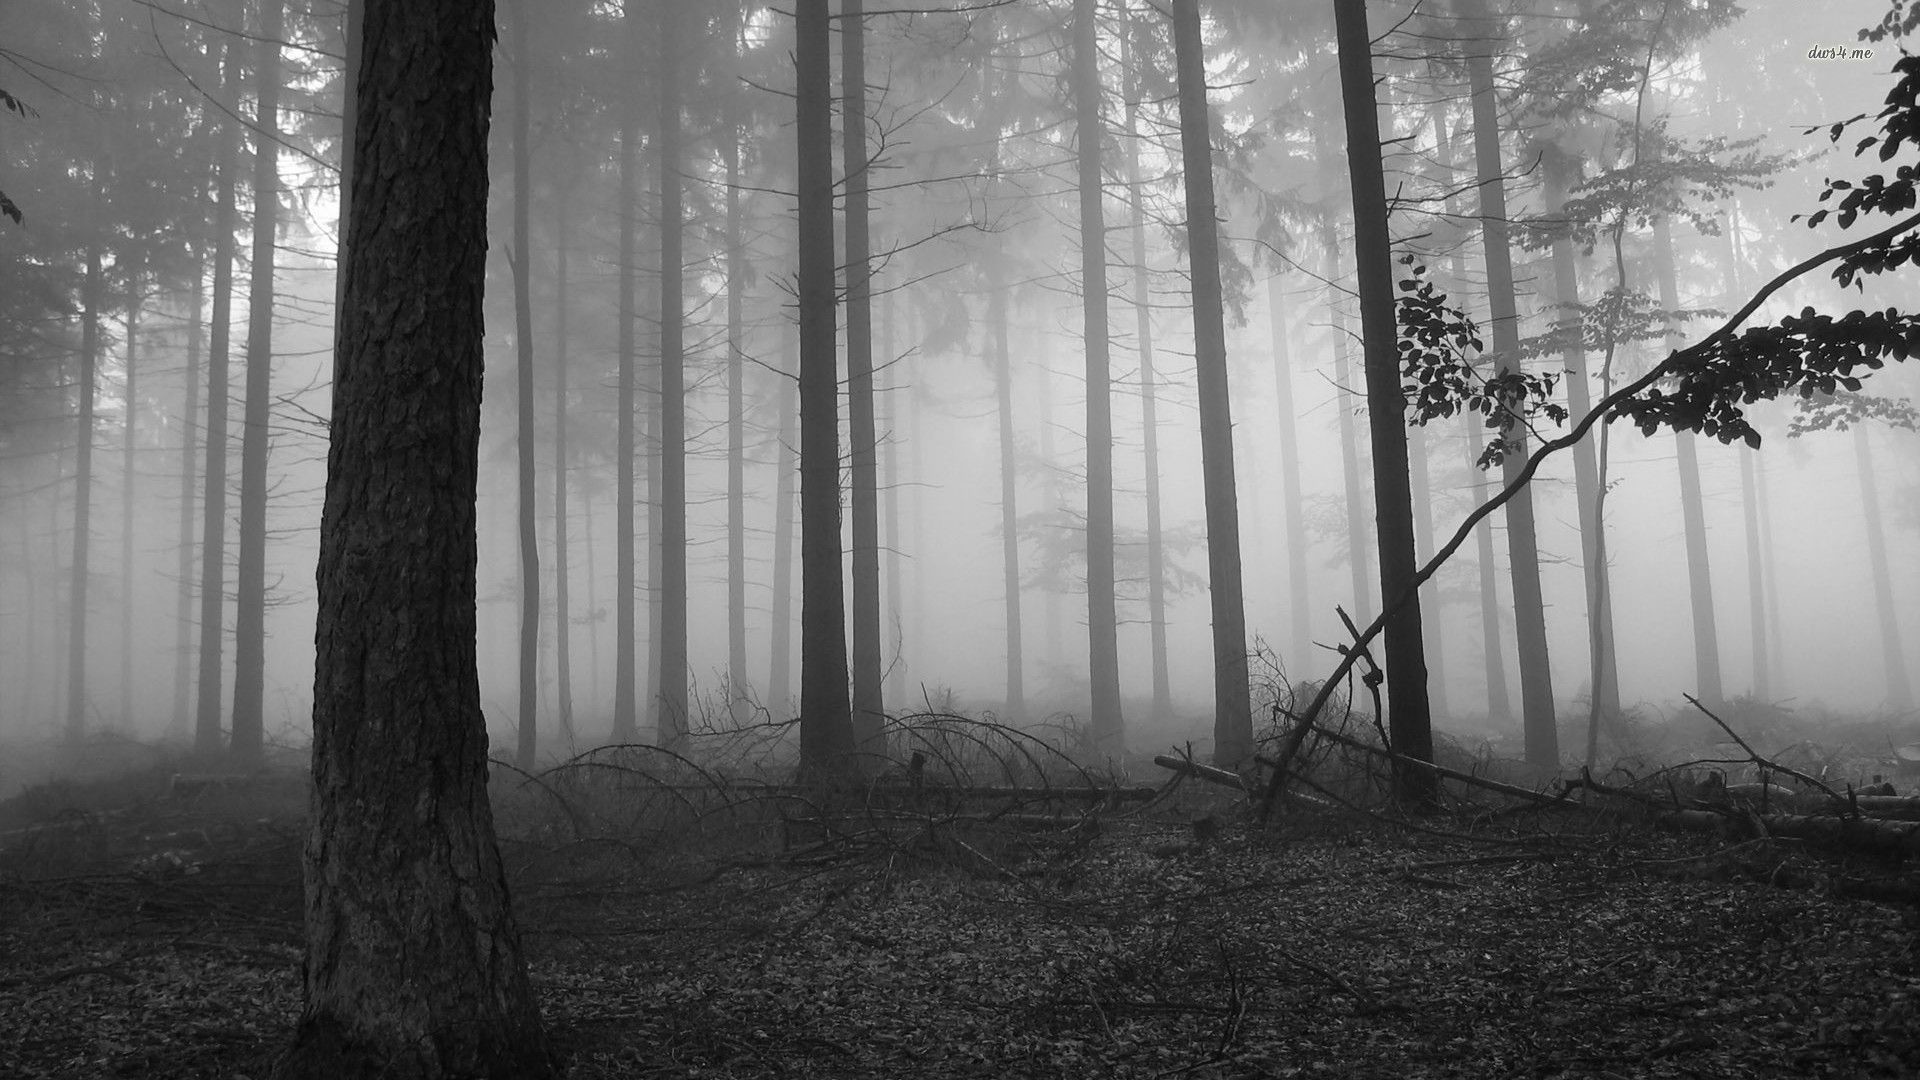 1920x1080 HD Beautiful Dark Forest Images & Wallpapers (Goldie Tew, 08.08.13)